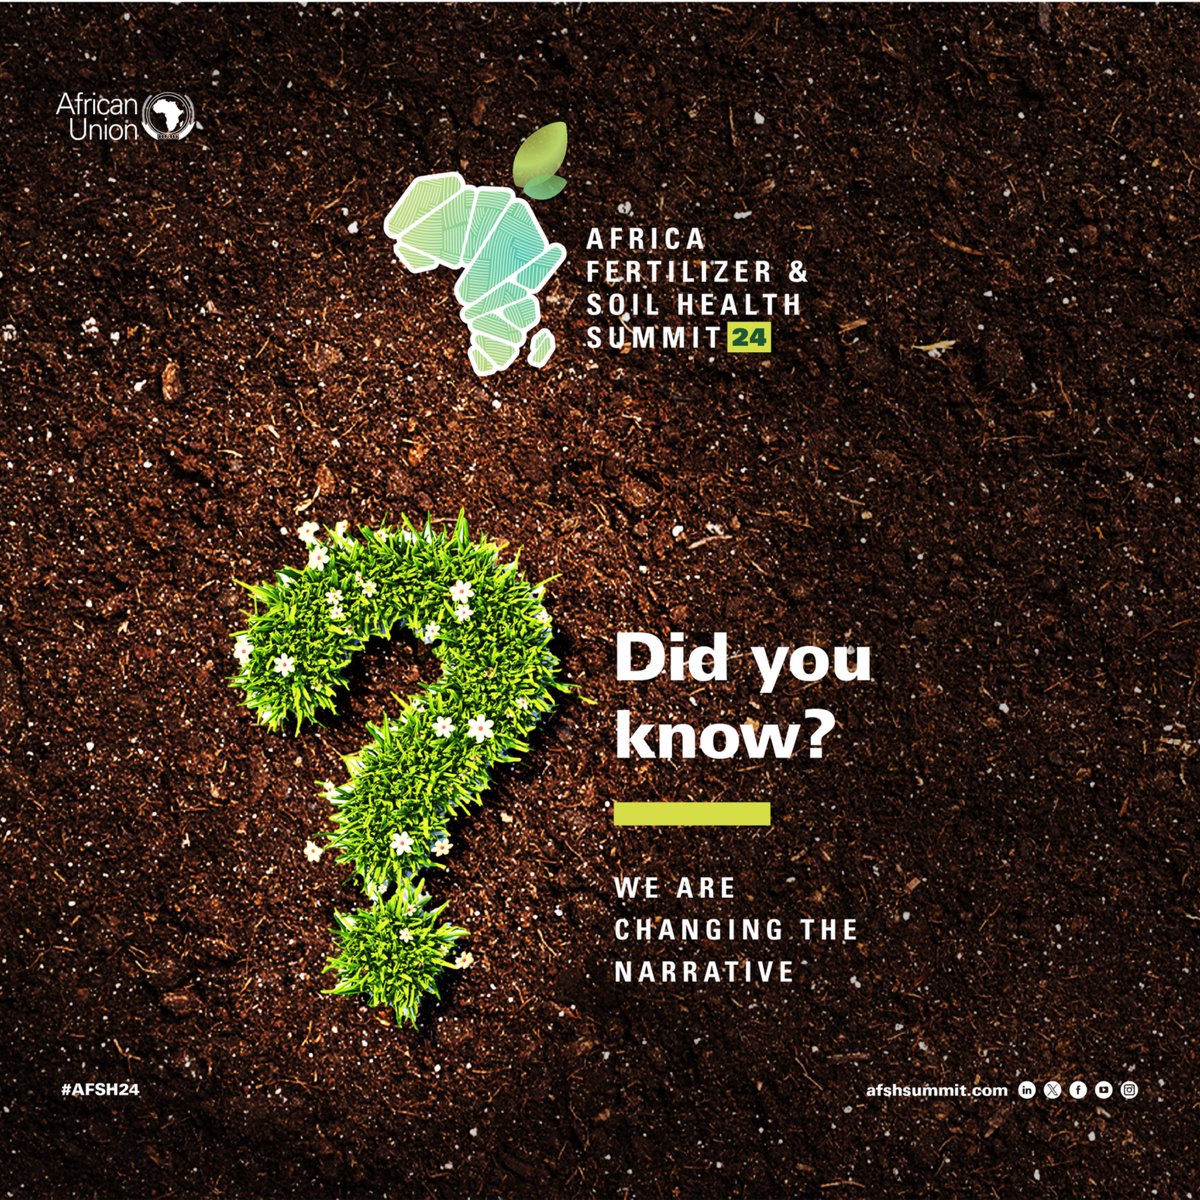 🌱 Soil health is the cornerstone of sustainable agriculture. Let's invest in practices that nurture our soils for future generations. #SoilHealth #Sustainability 🌍🌾 #AFSH24 #AFSH #AFSHS2024